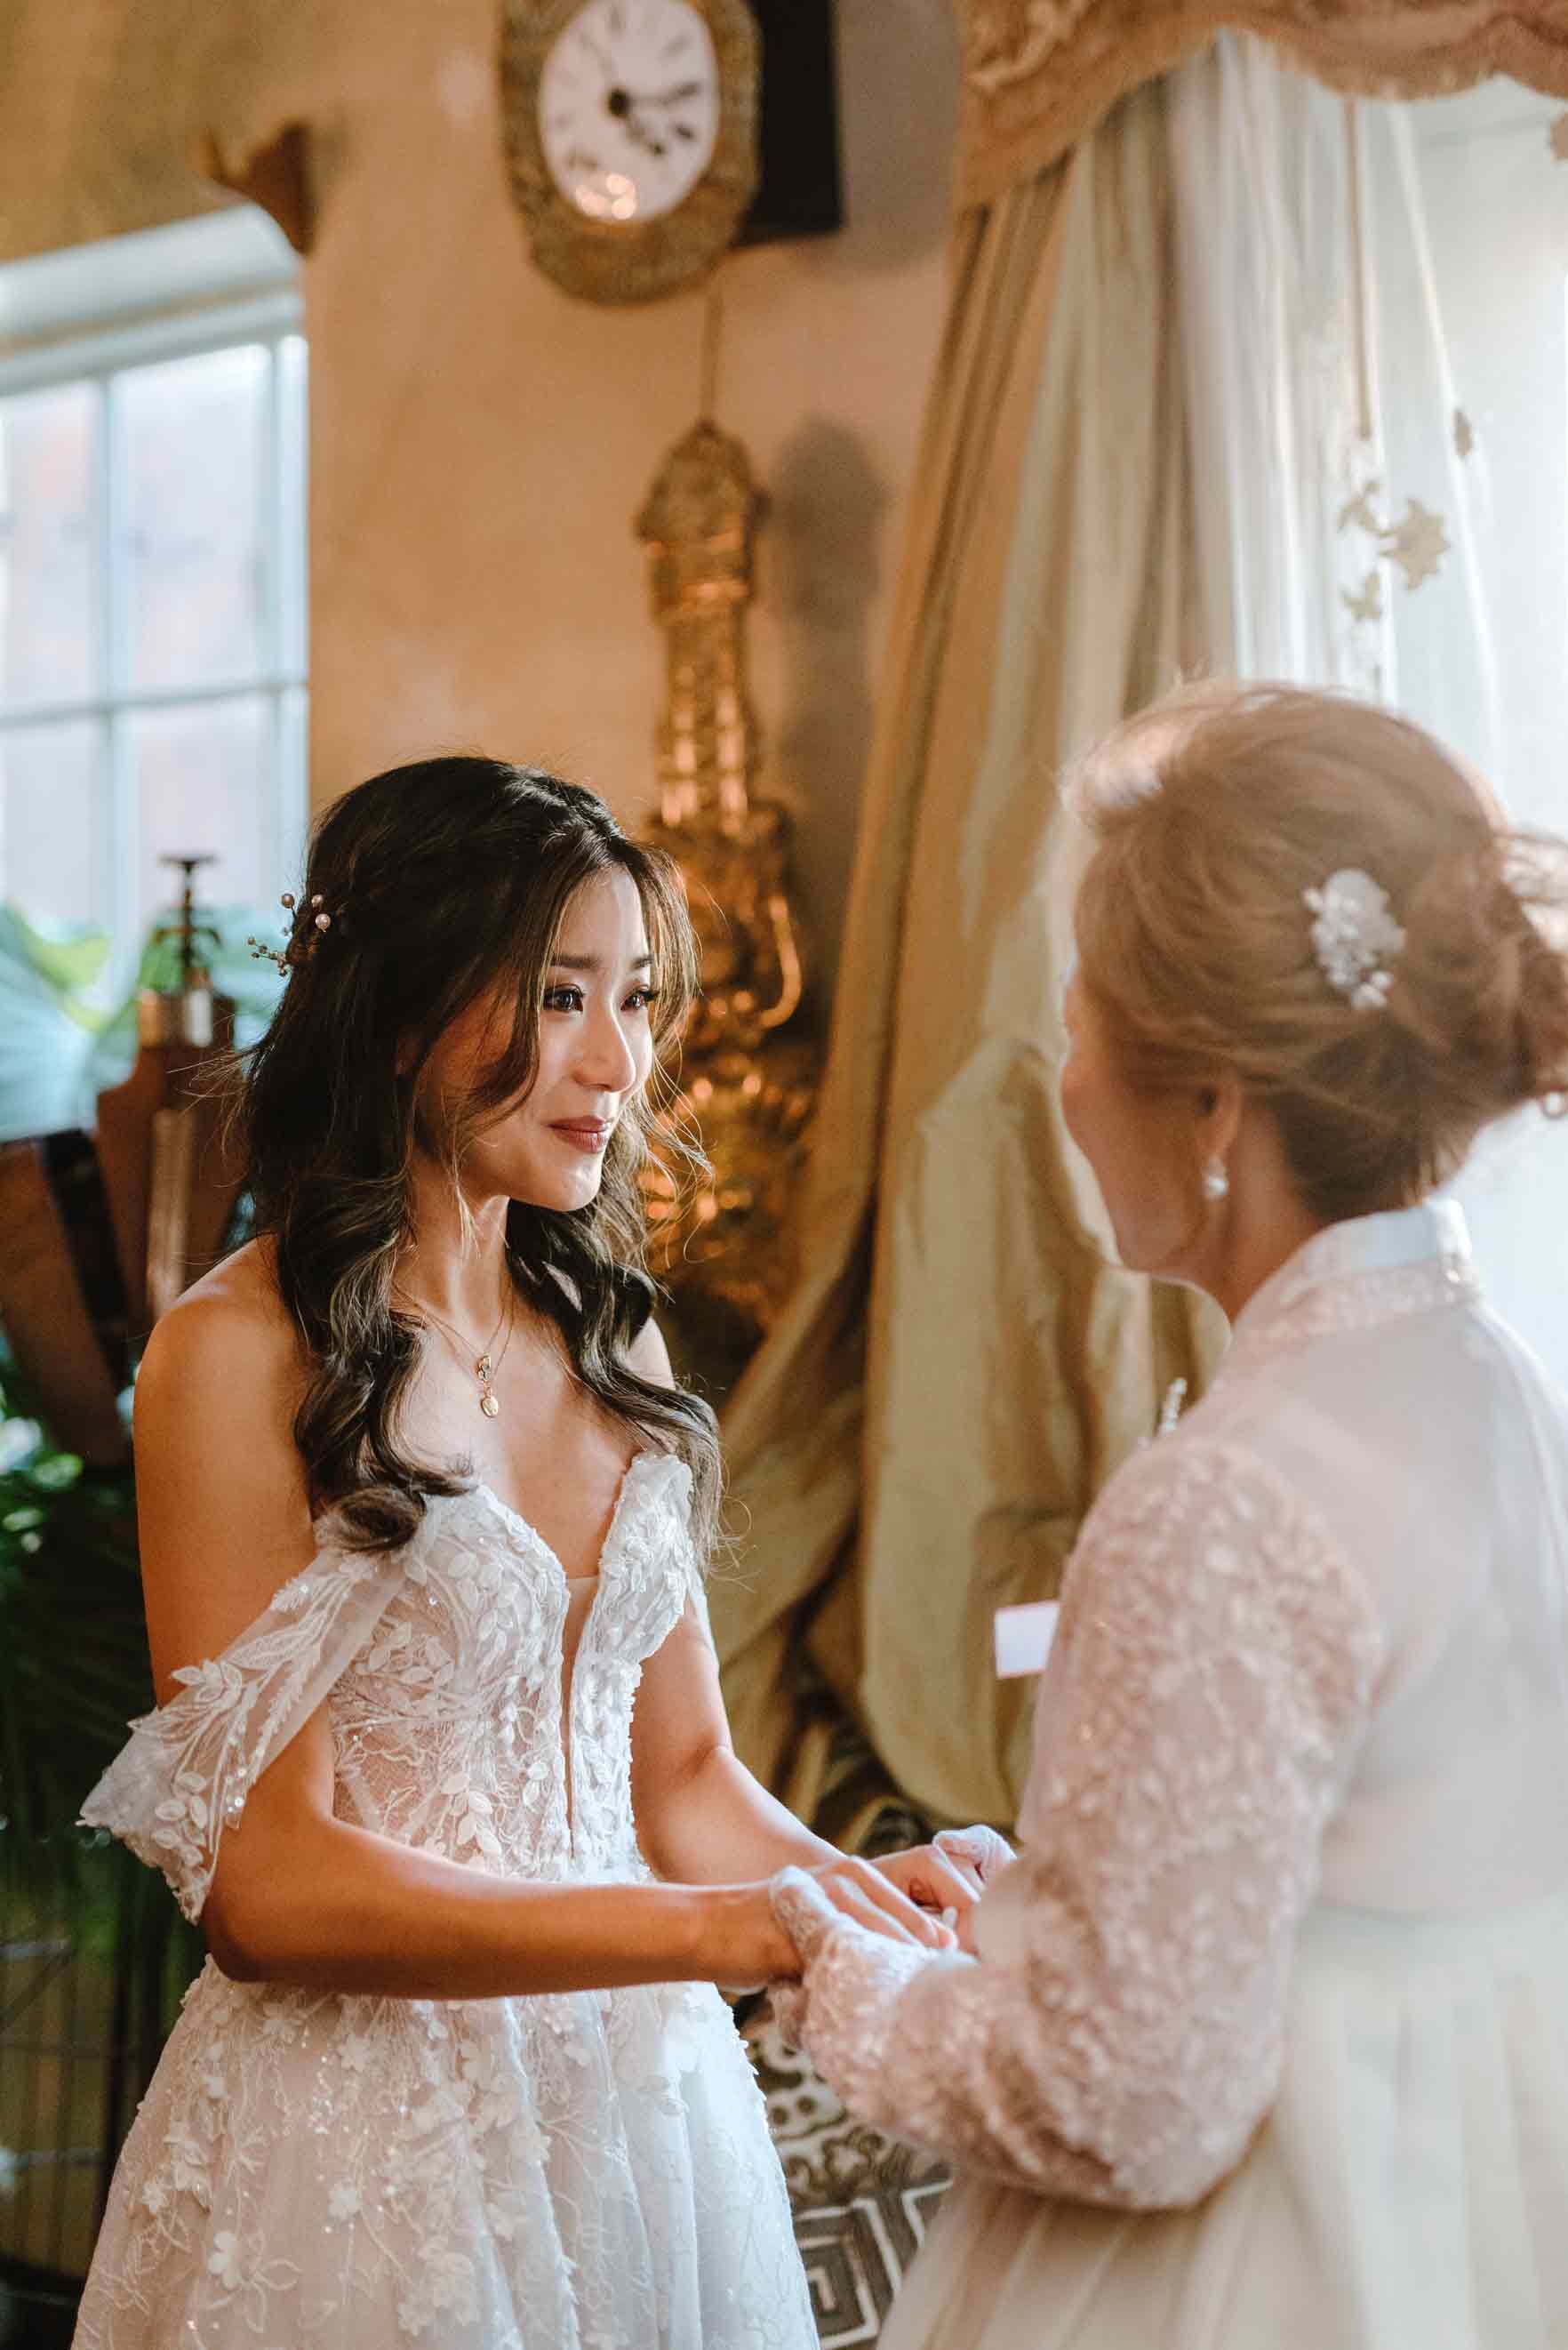 emotional-mother-daughter-moment-bridal-getting-ready-space.jpg